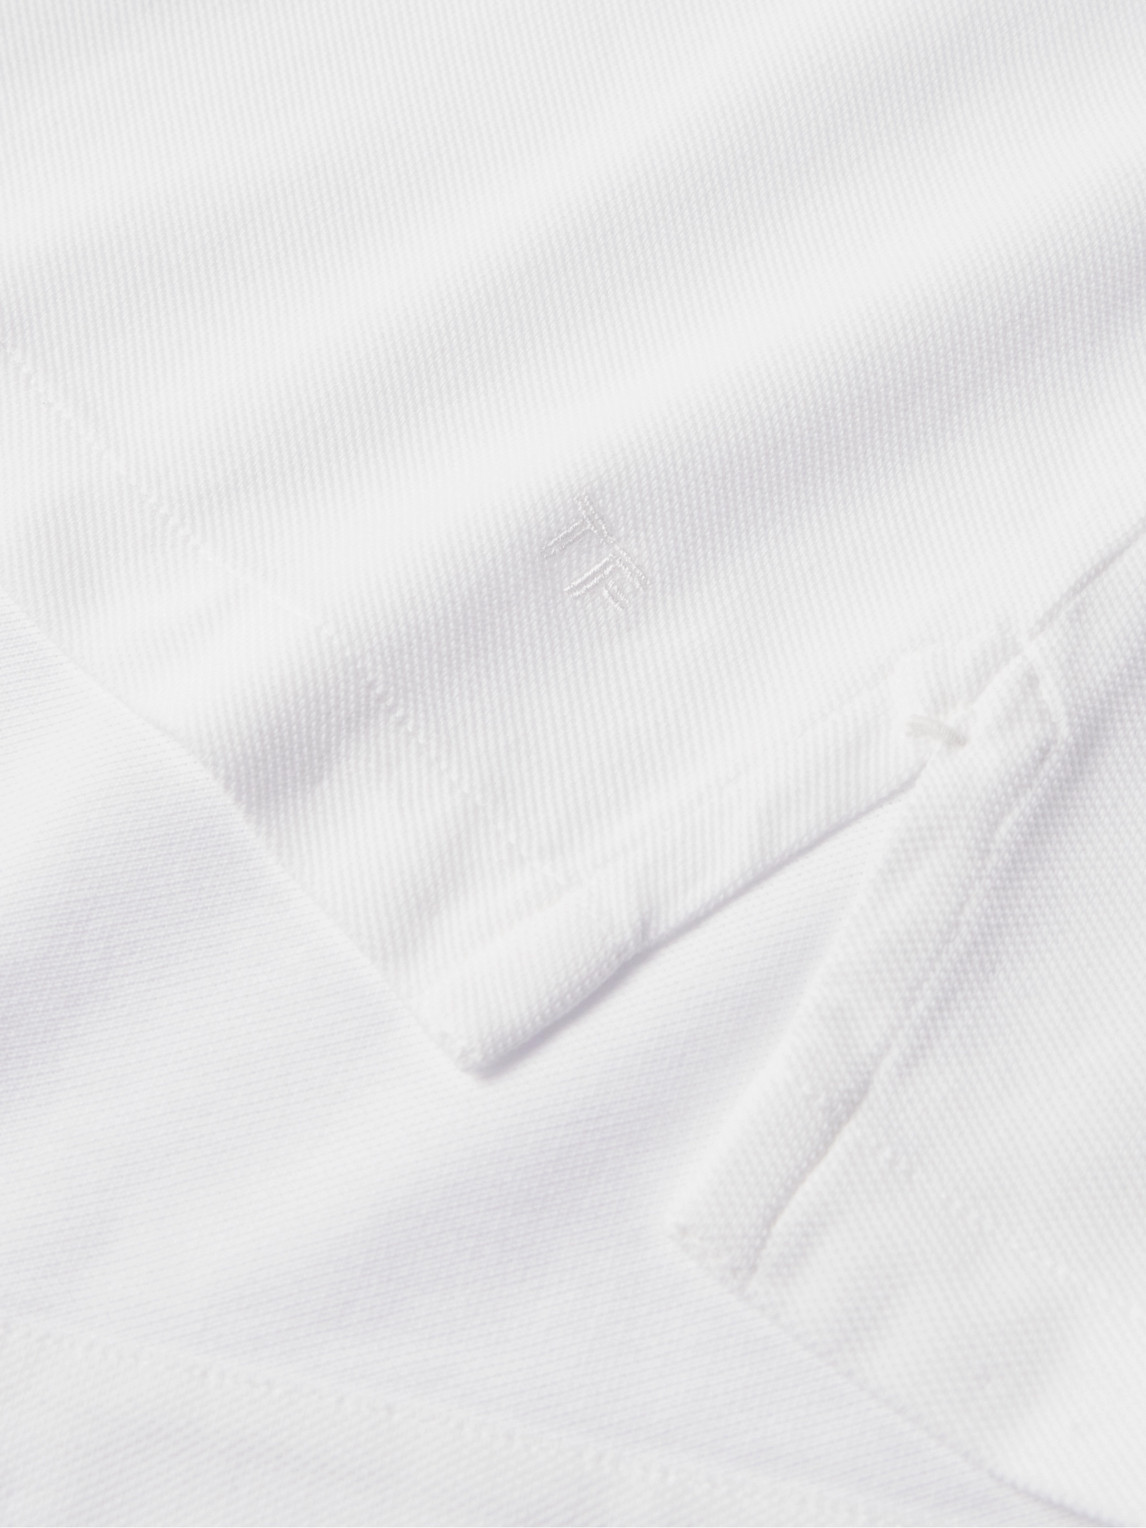 Shop Tom Ford Garment-dyed Cotton-piqué Polo Shirt In White